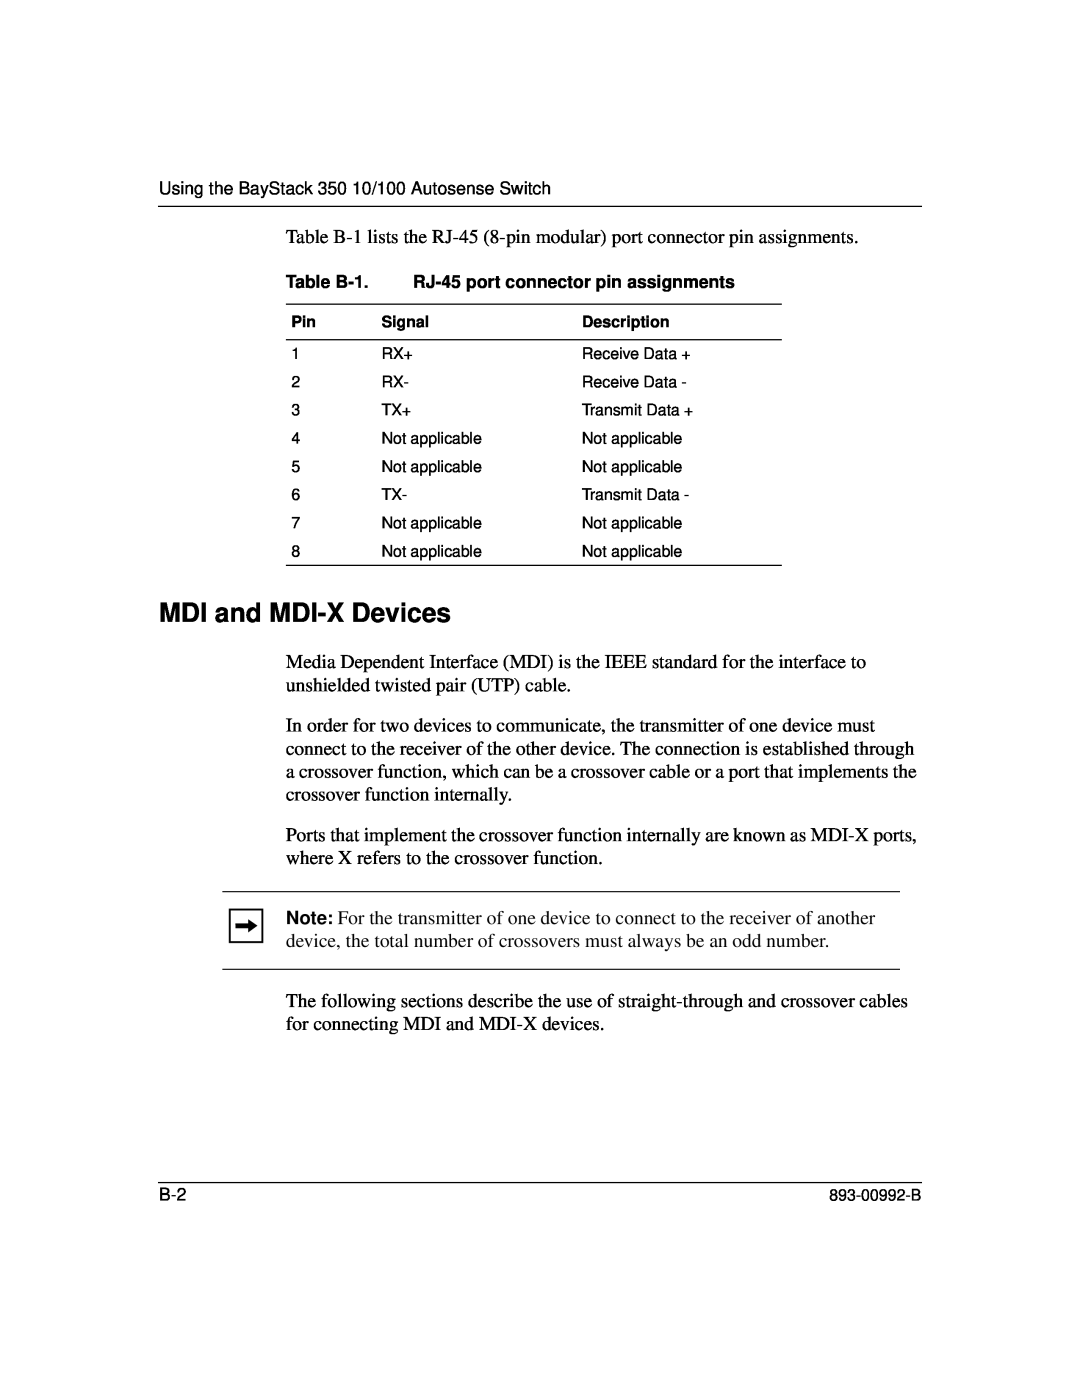 Bay Technical Associates 350 manual MDI and MDI-X Devices, Table B-1, RJ-45 port connector pin assignments 